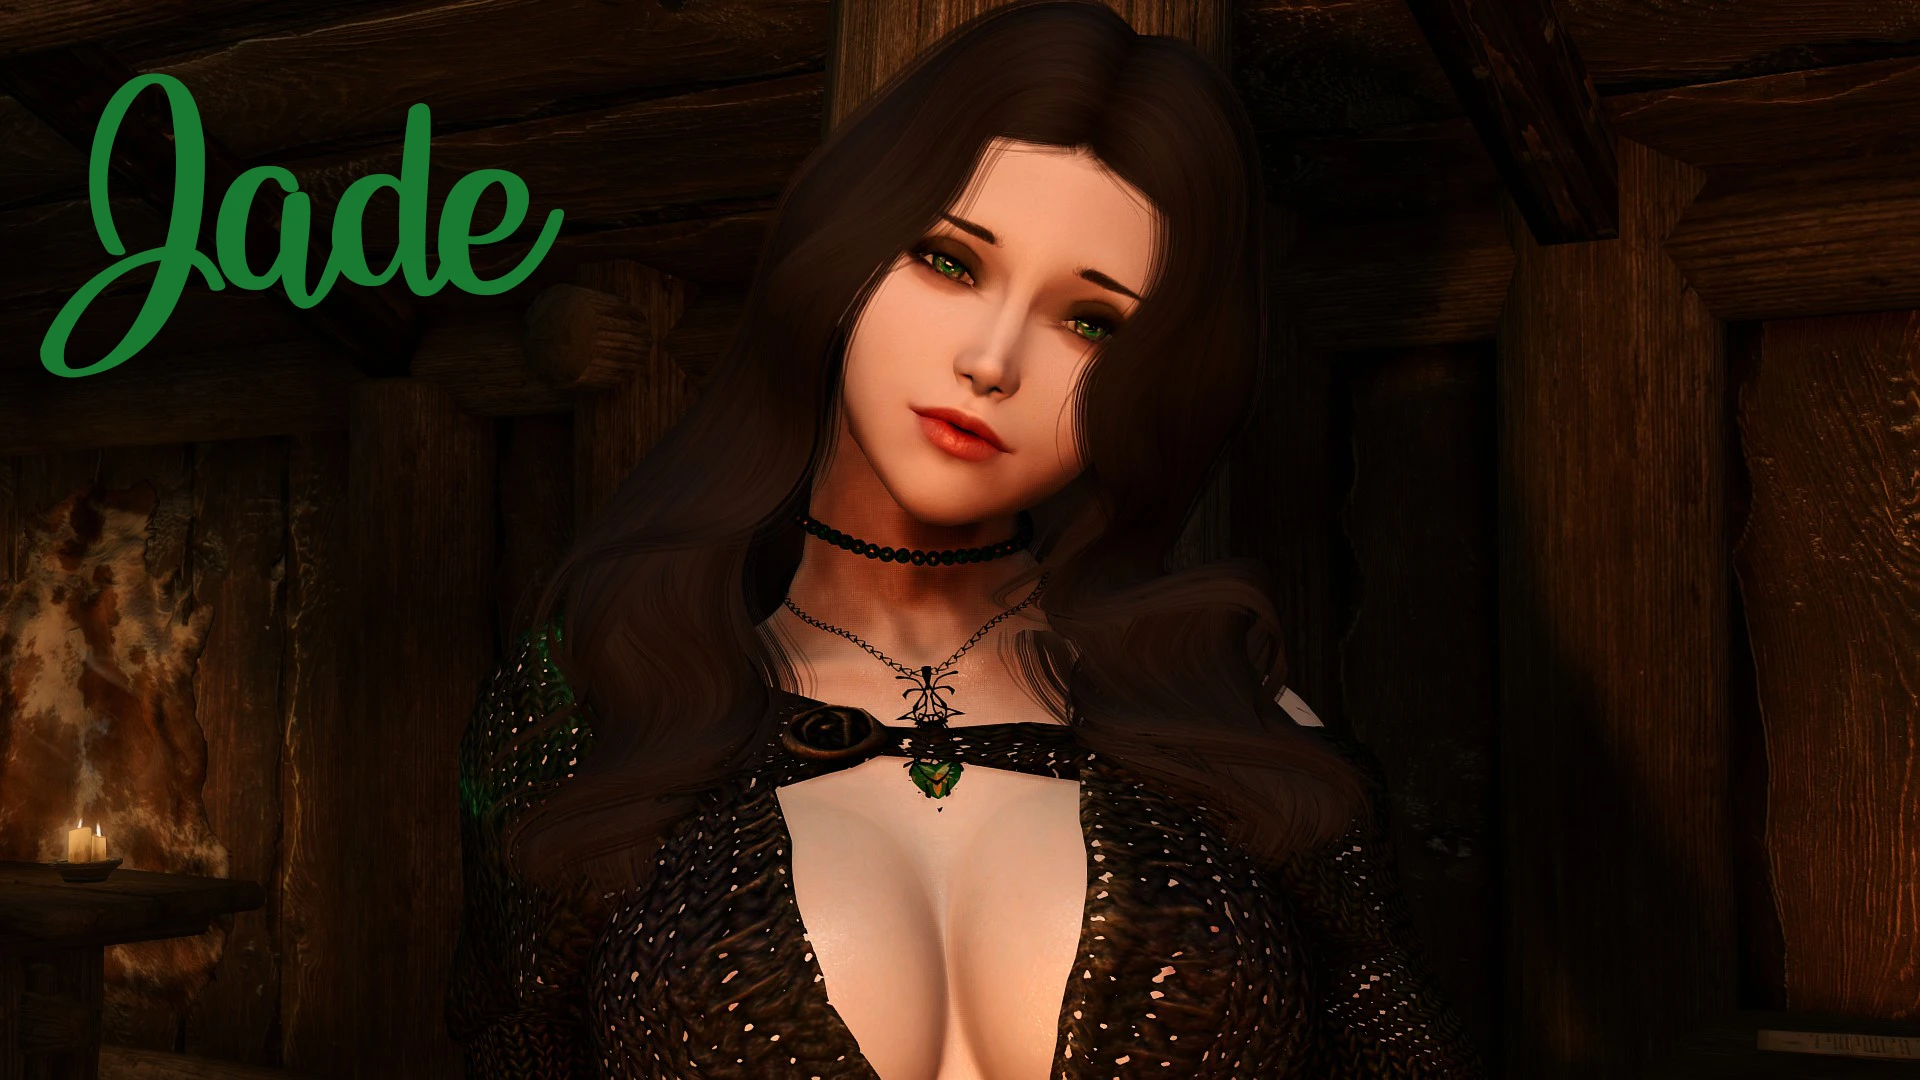 attractive female nord save file at skyrim nexus mods.